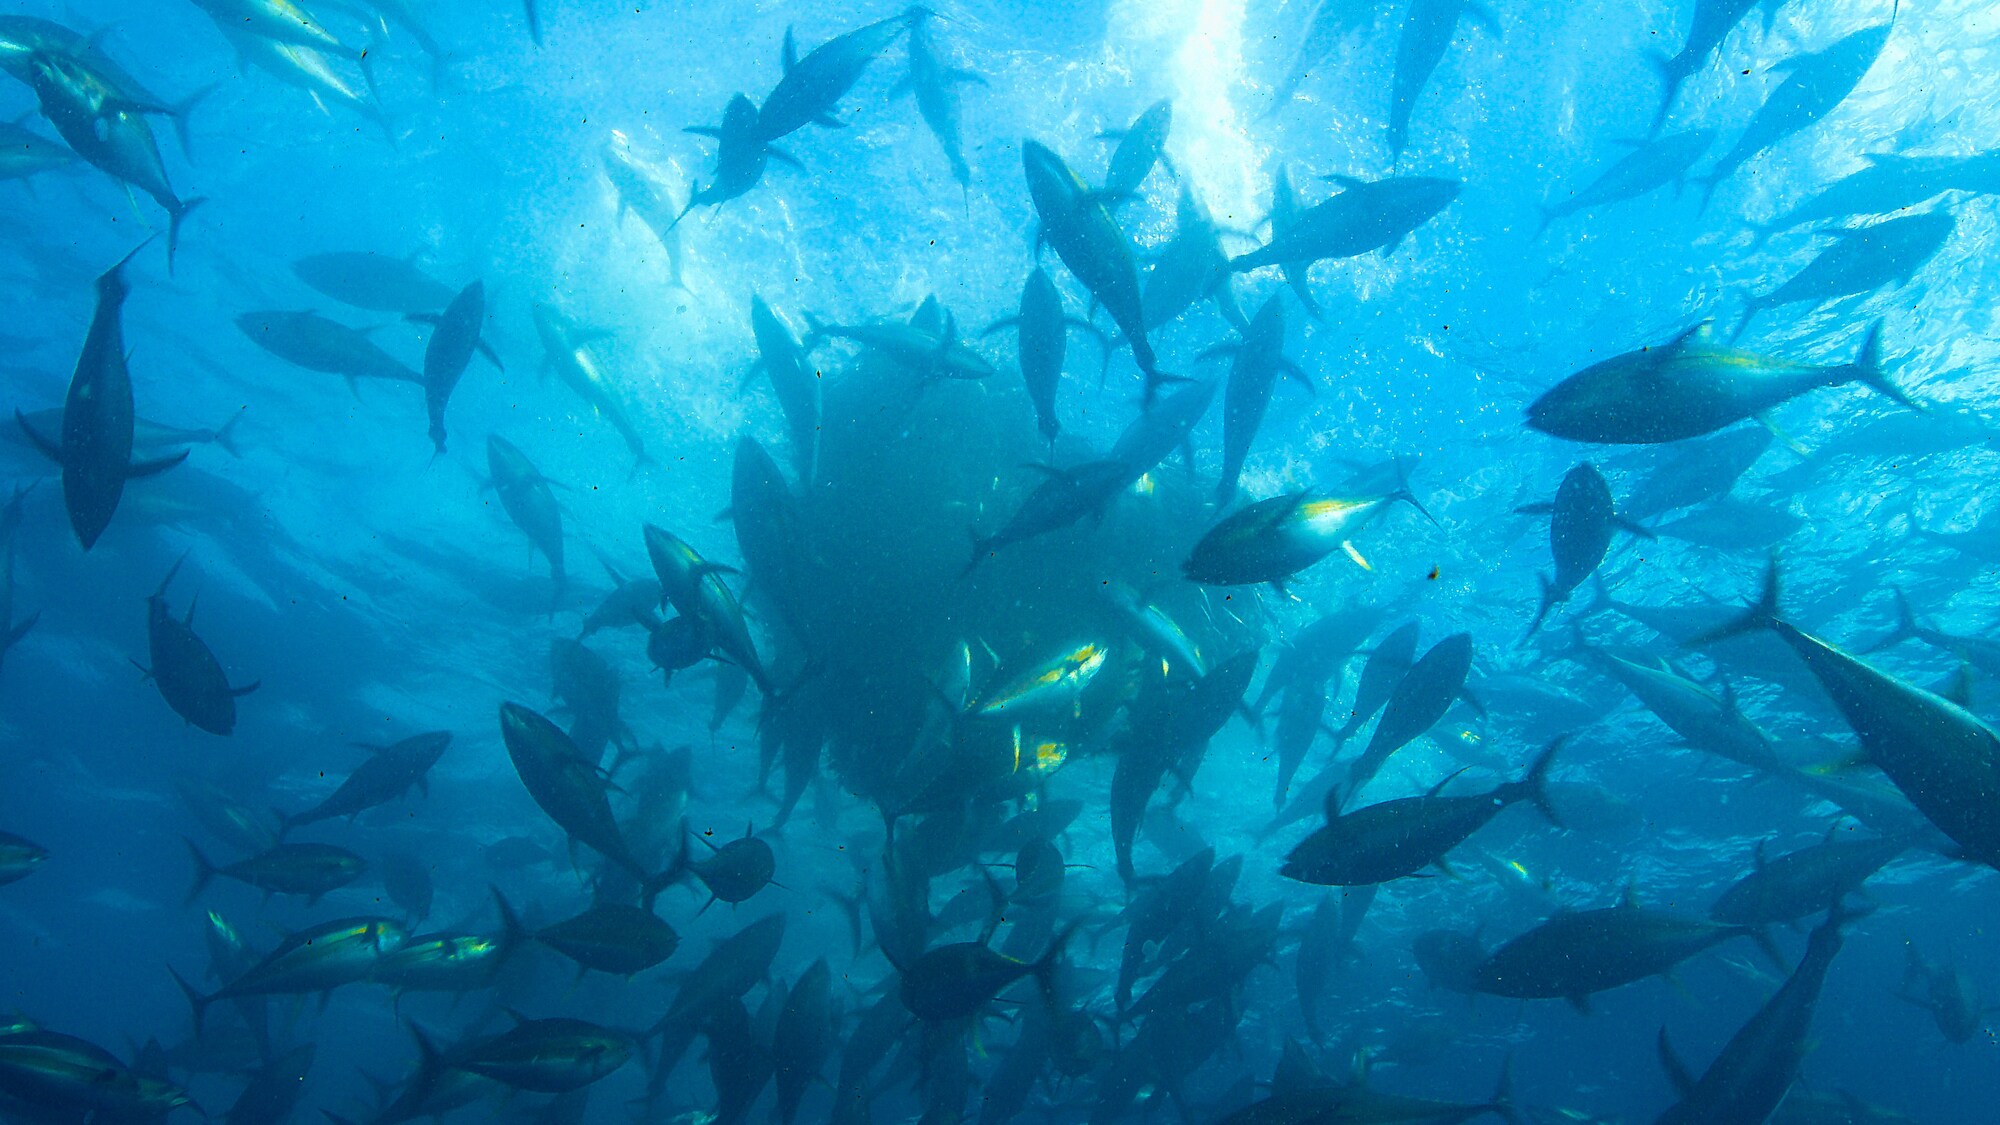 A shoal of tuna swimming around a bait ball. (Credit: National Geographic/Bertie Gregory for Disney+)